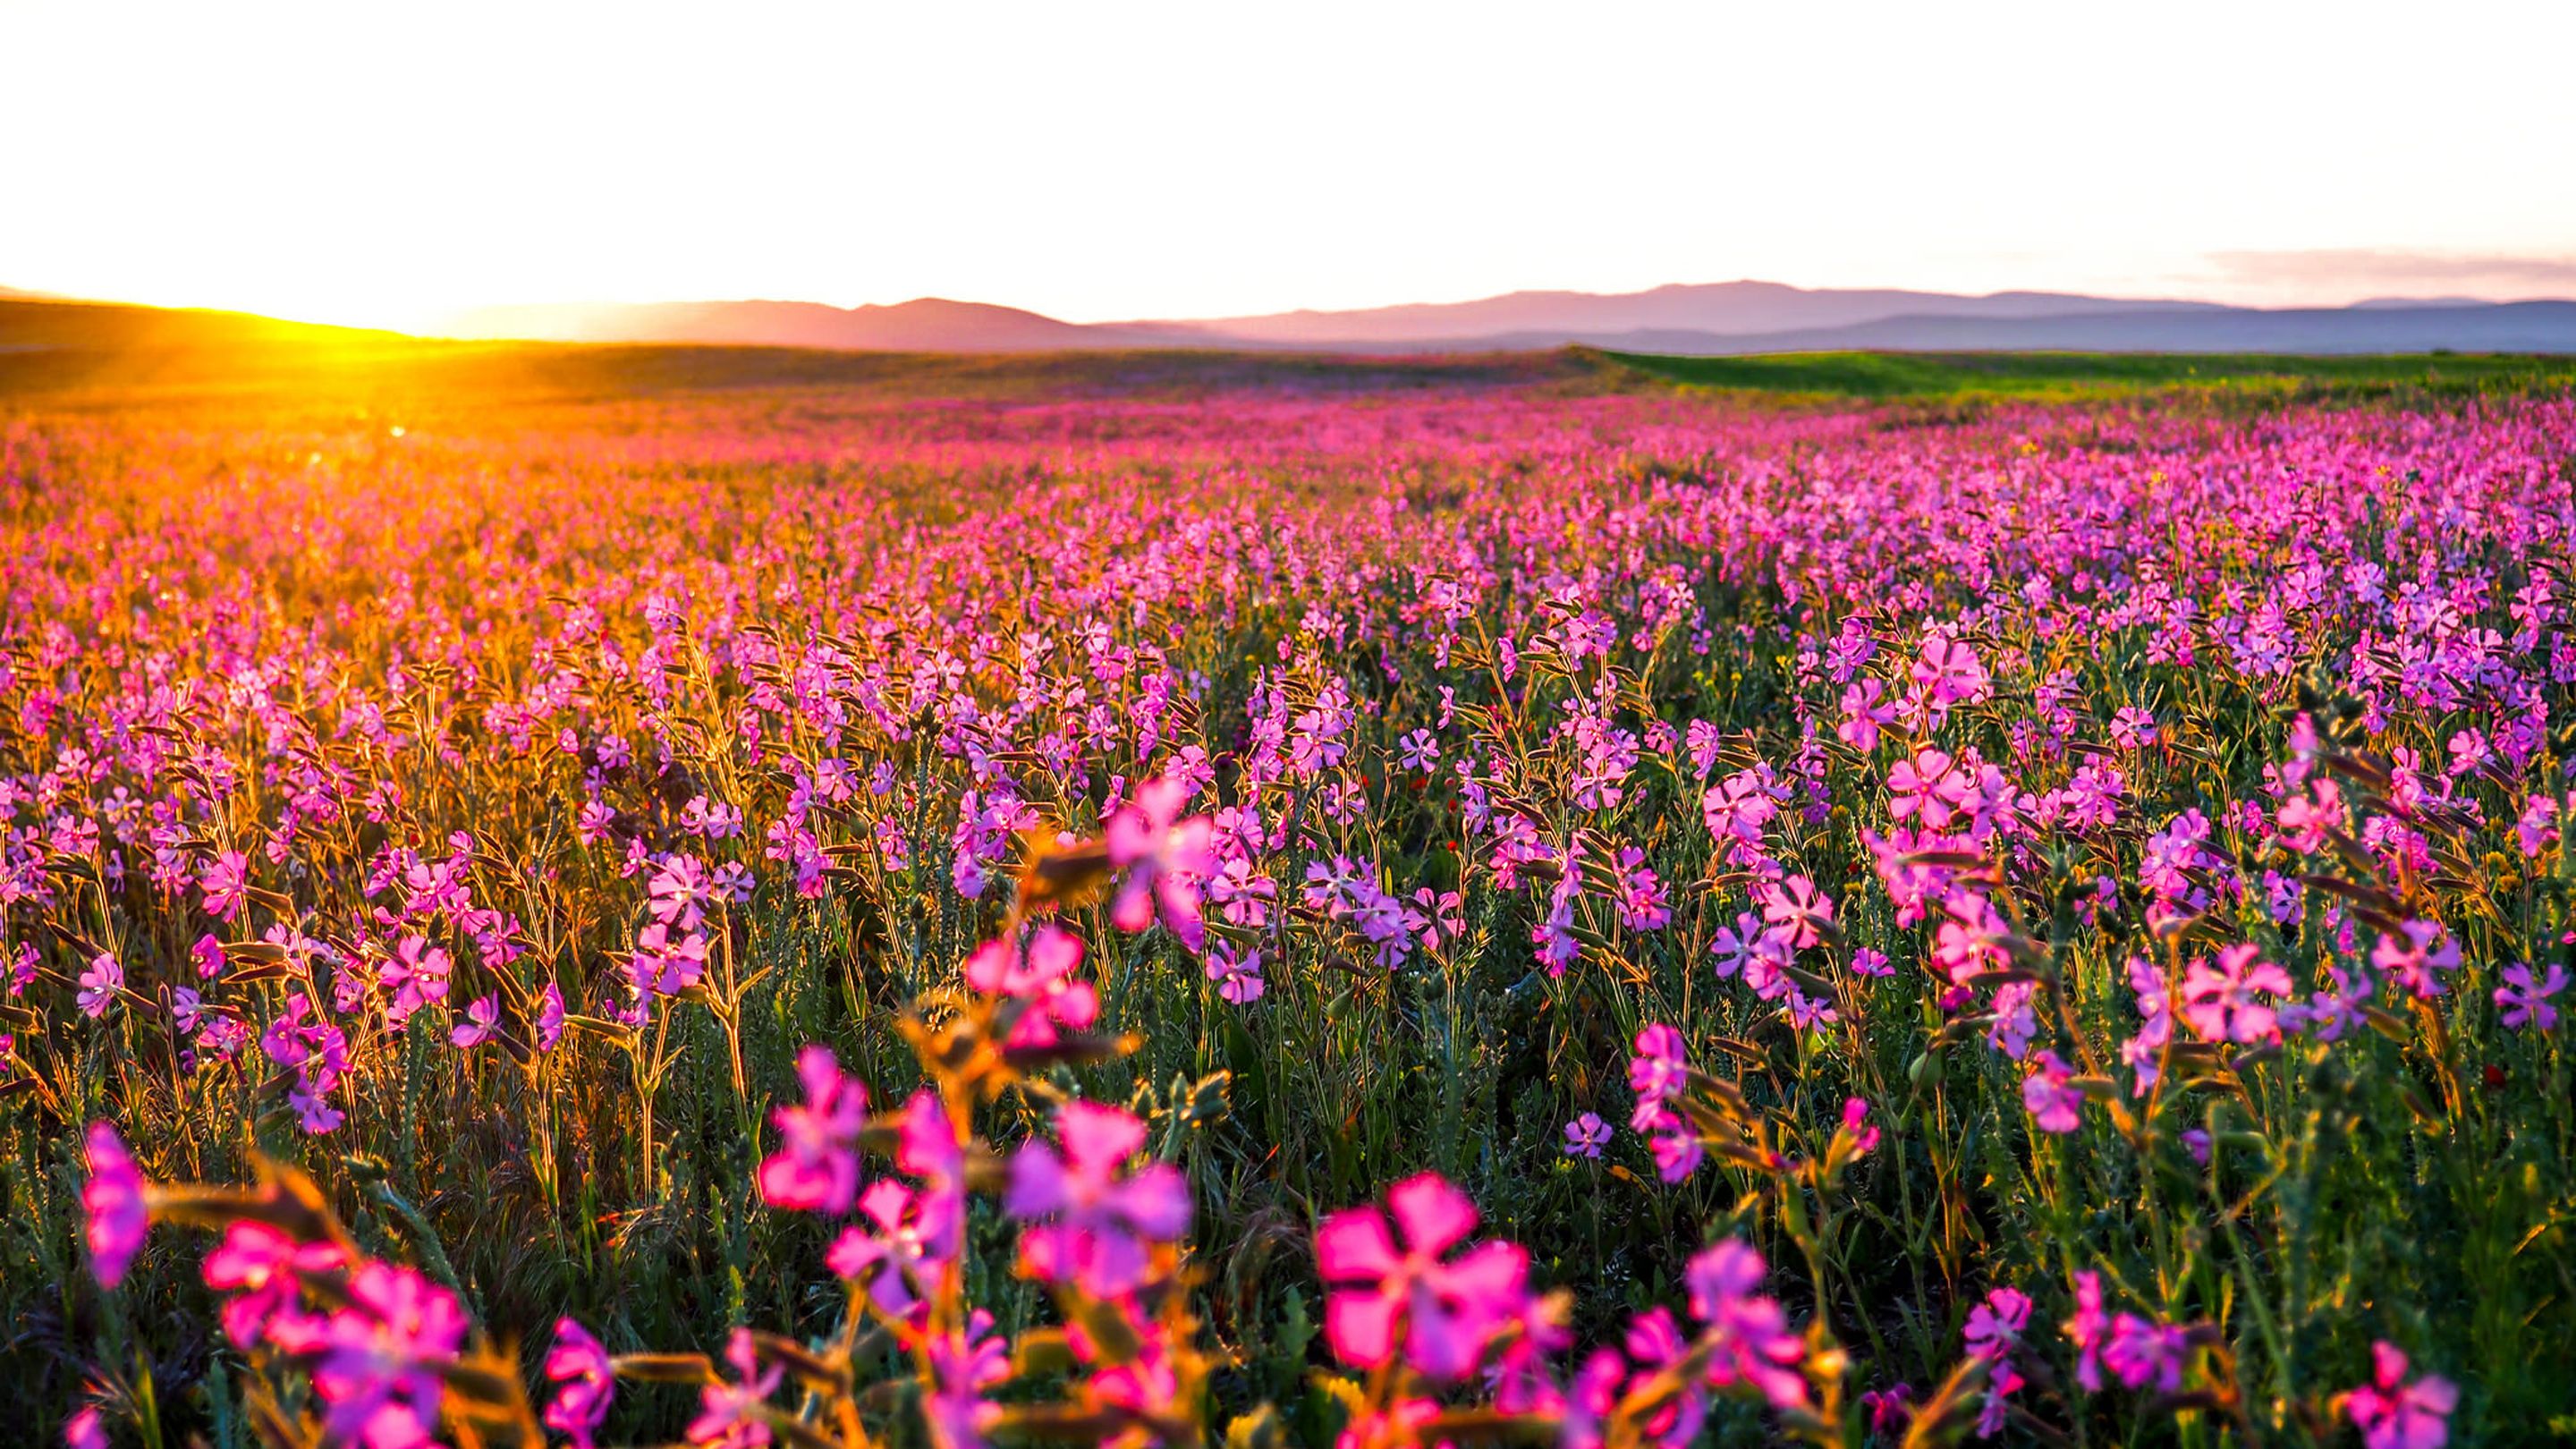 Sunrise Field With Pink Flowers In The Early Morning HD Wallpaper, Wallpaper13.com